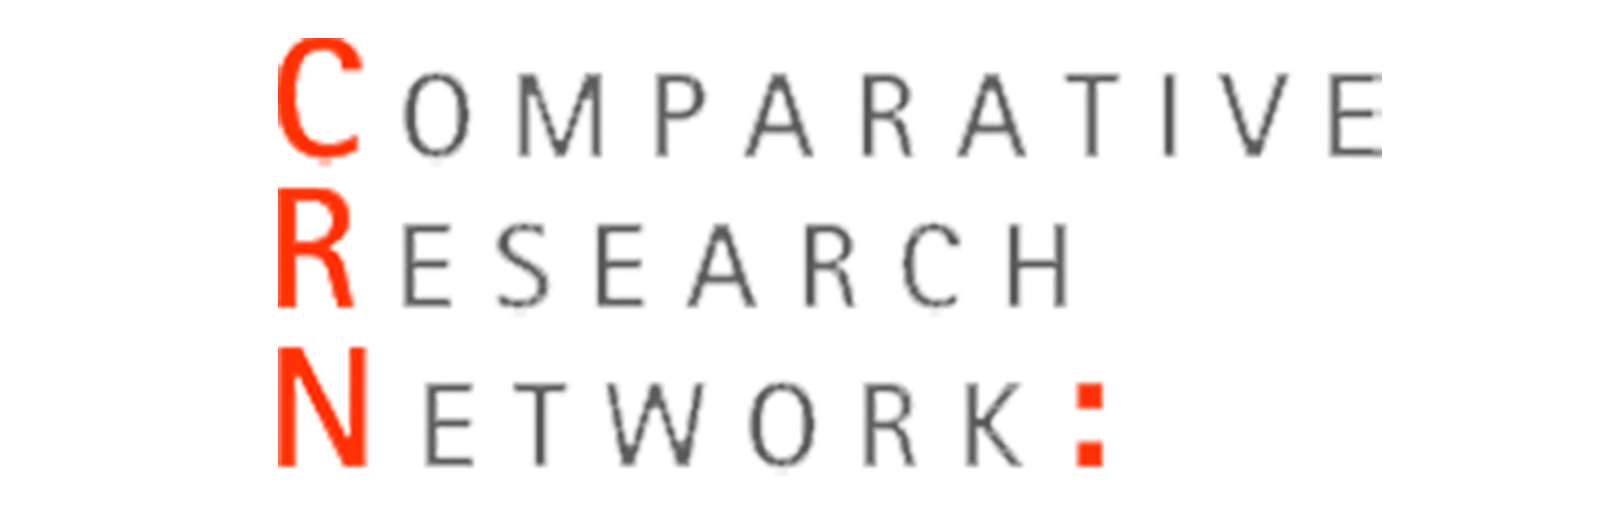 Comparative research network